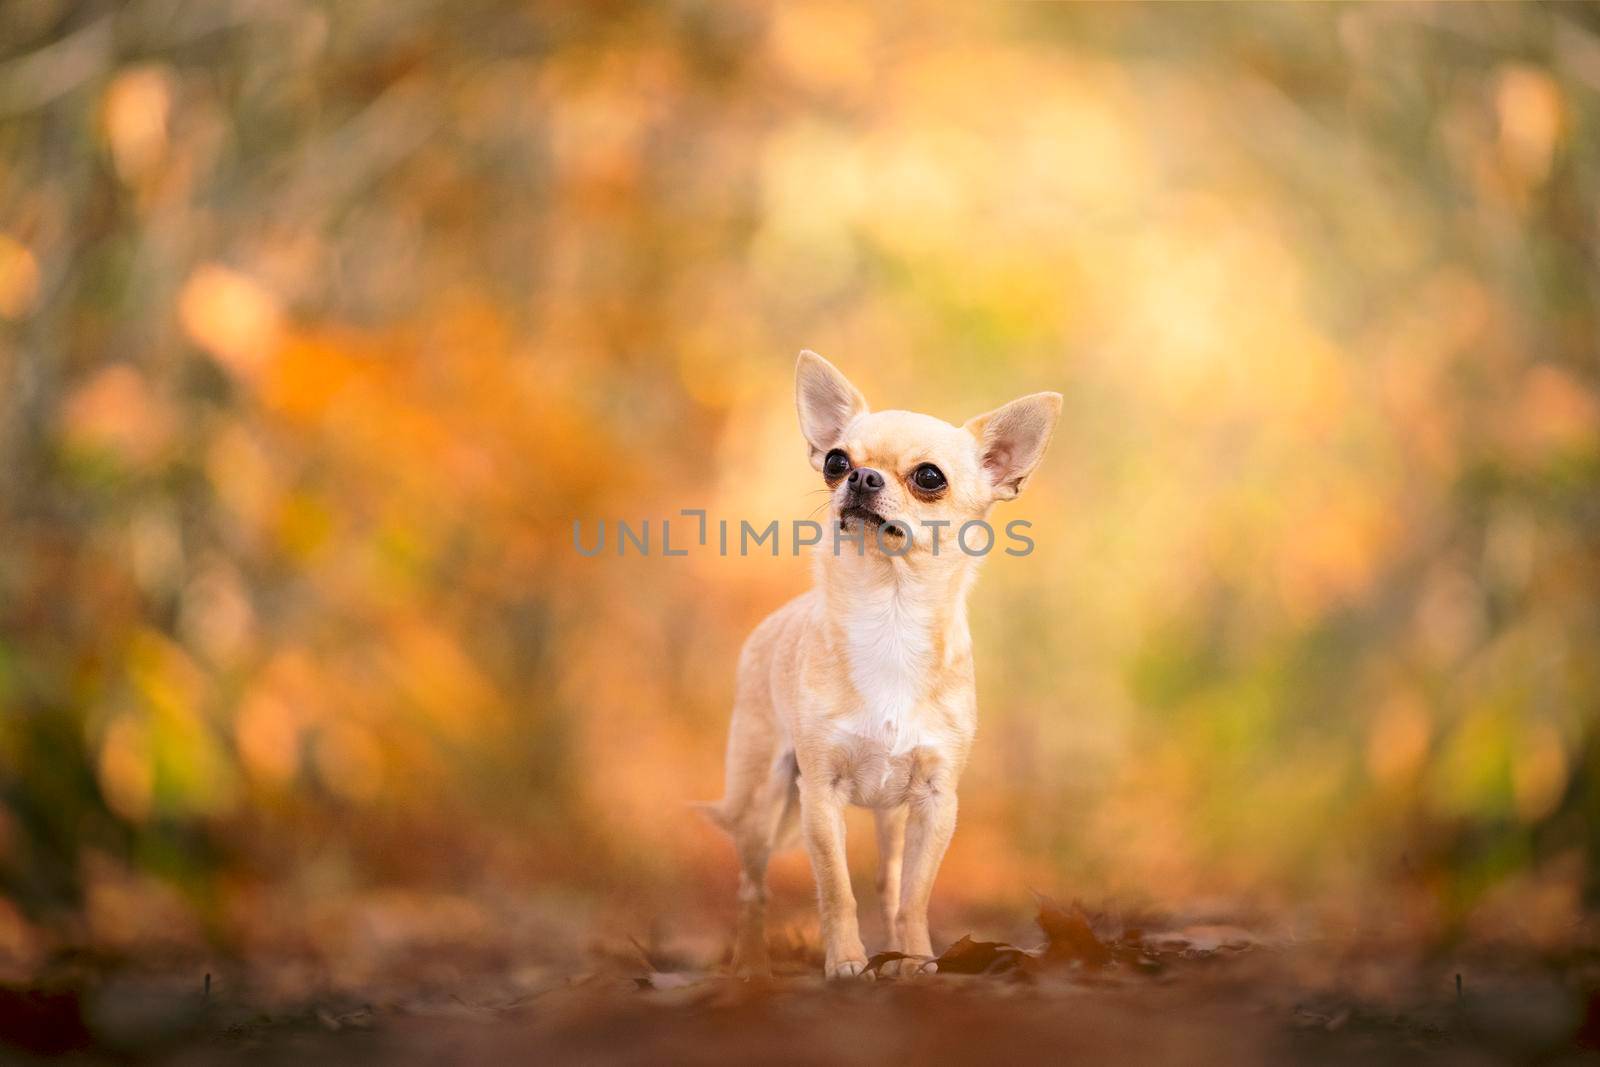 Chihuahua dog standing in an autumn forest lane with sunbeams and selective focus